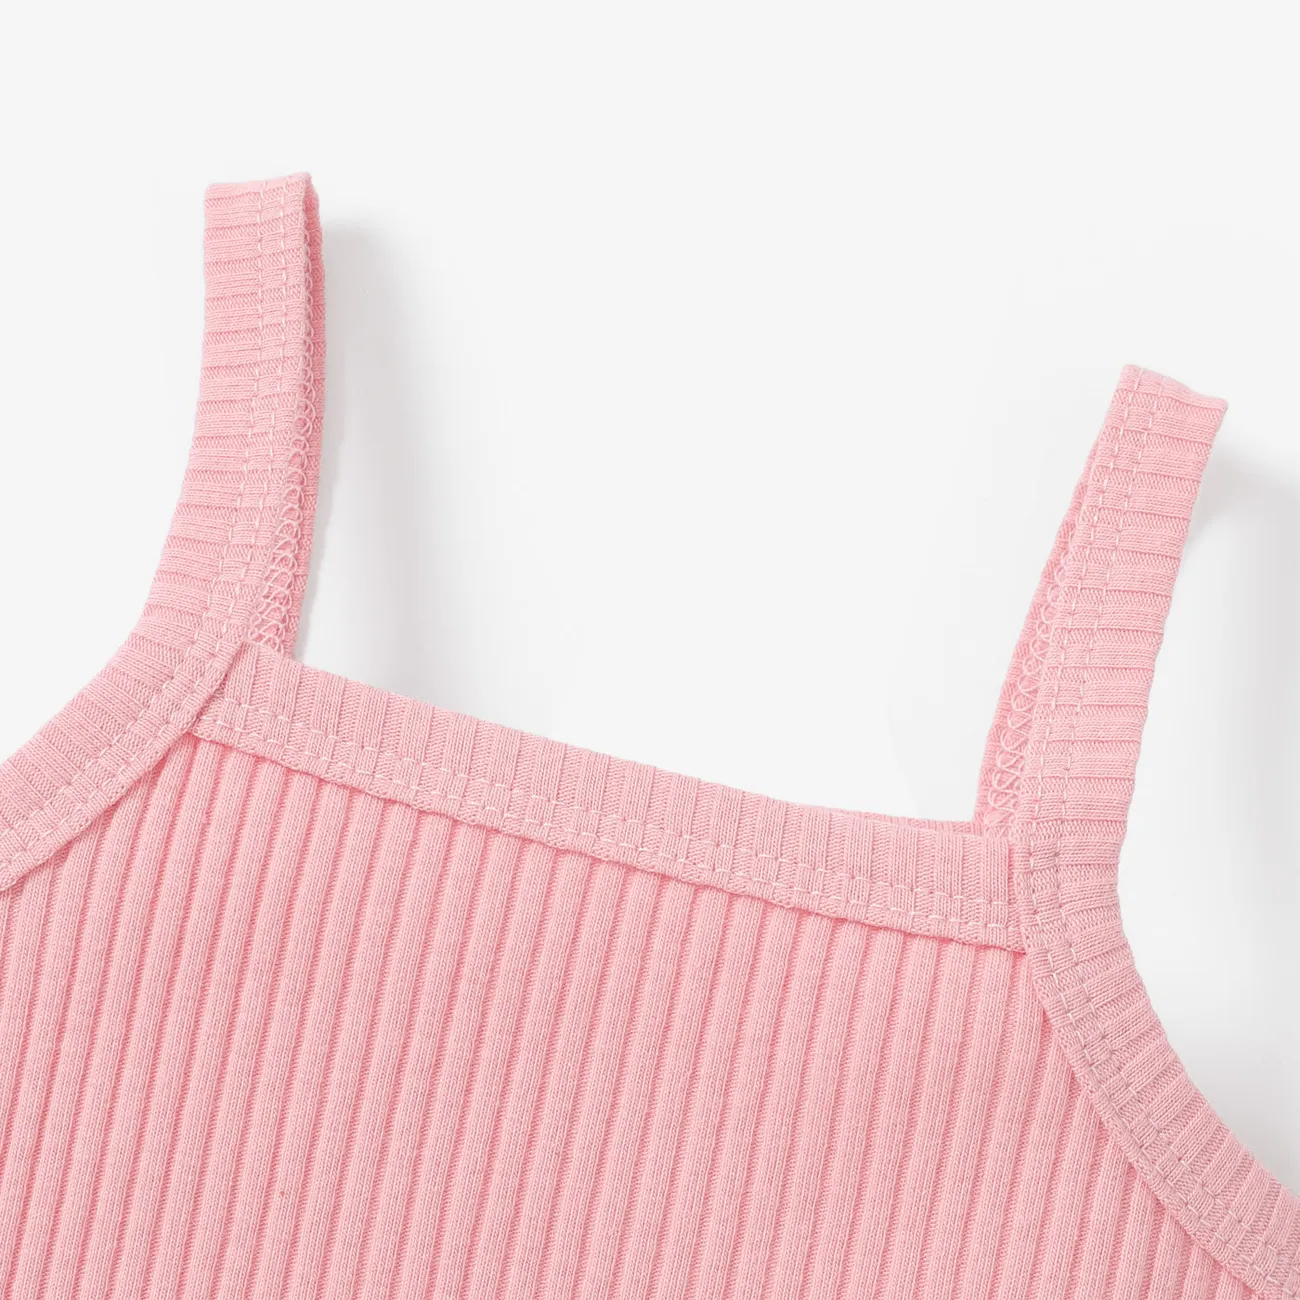 Baby Girl 95% Cotton Ribbed Solid Cami Top Pink big image 1